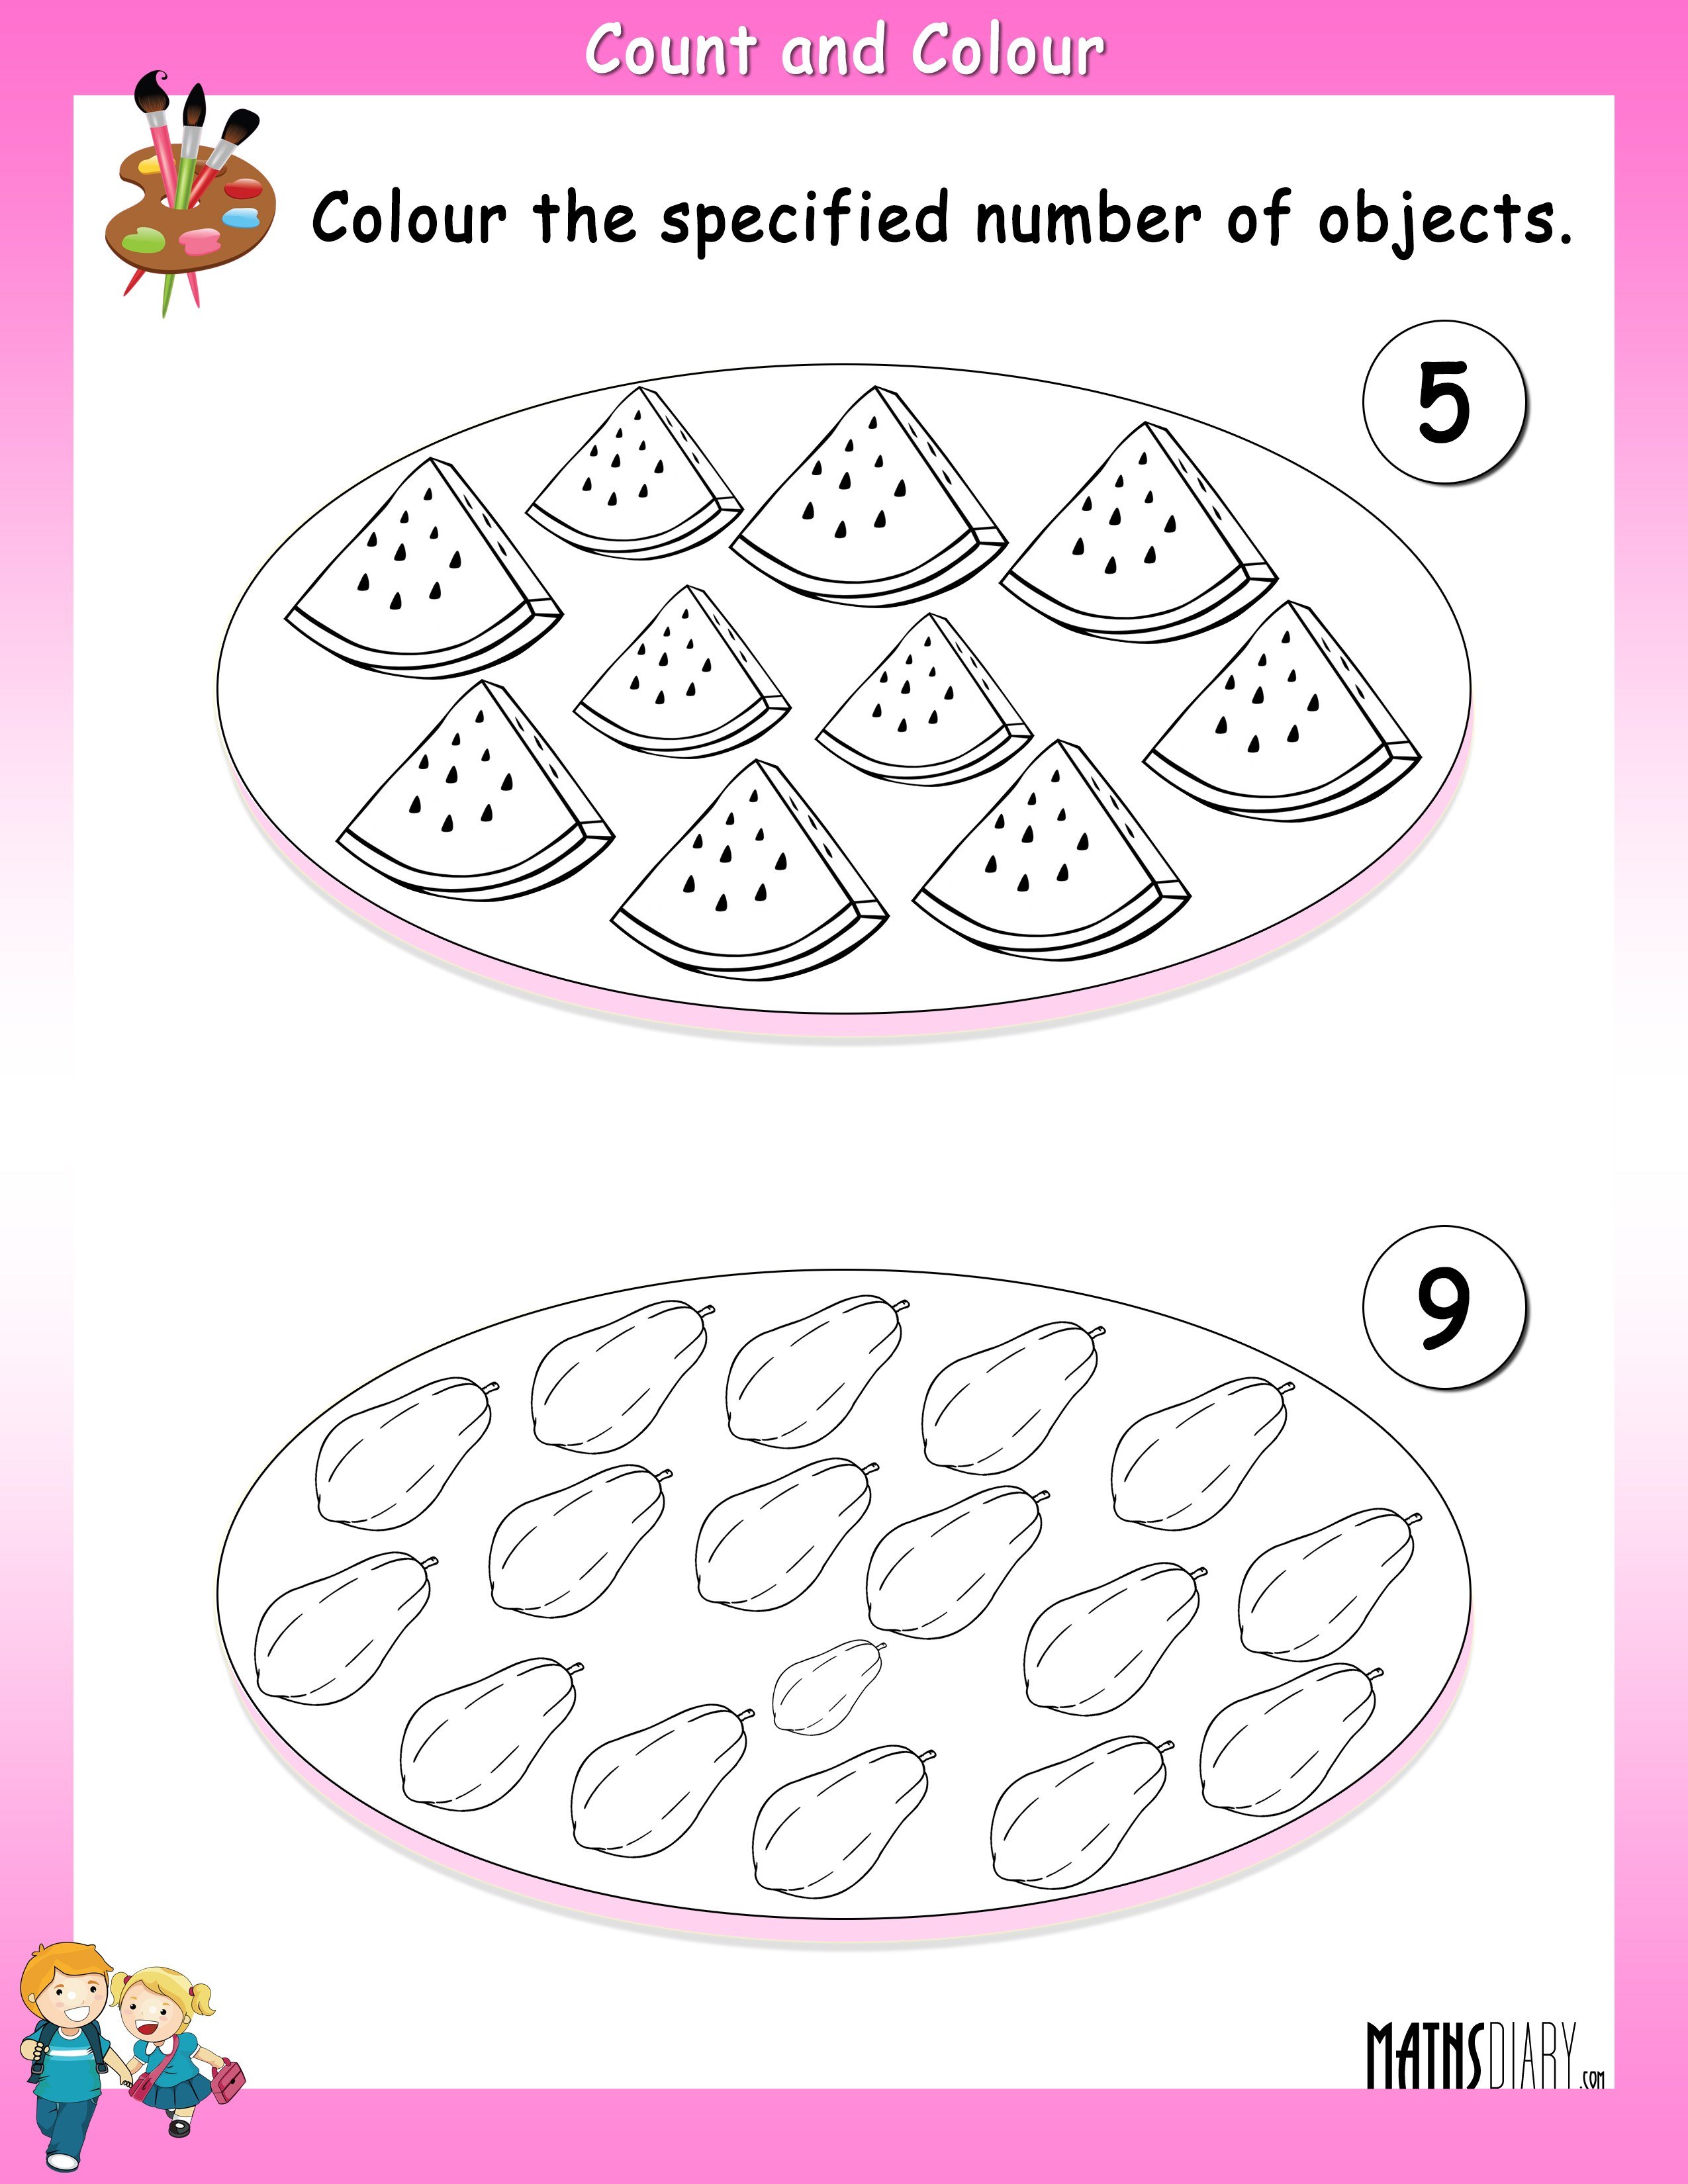 free-counting-numbers-1-10-printable-worksheets-kids-activities-count-and-color-worksheets-11